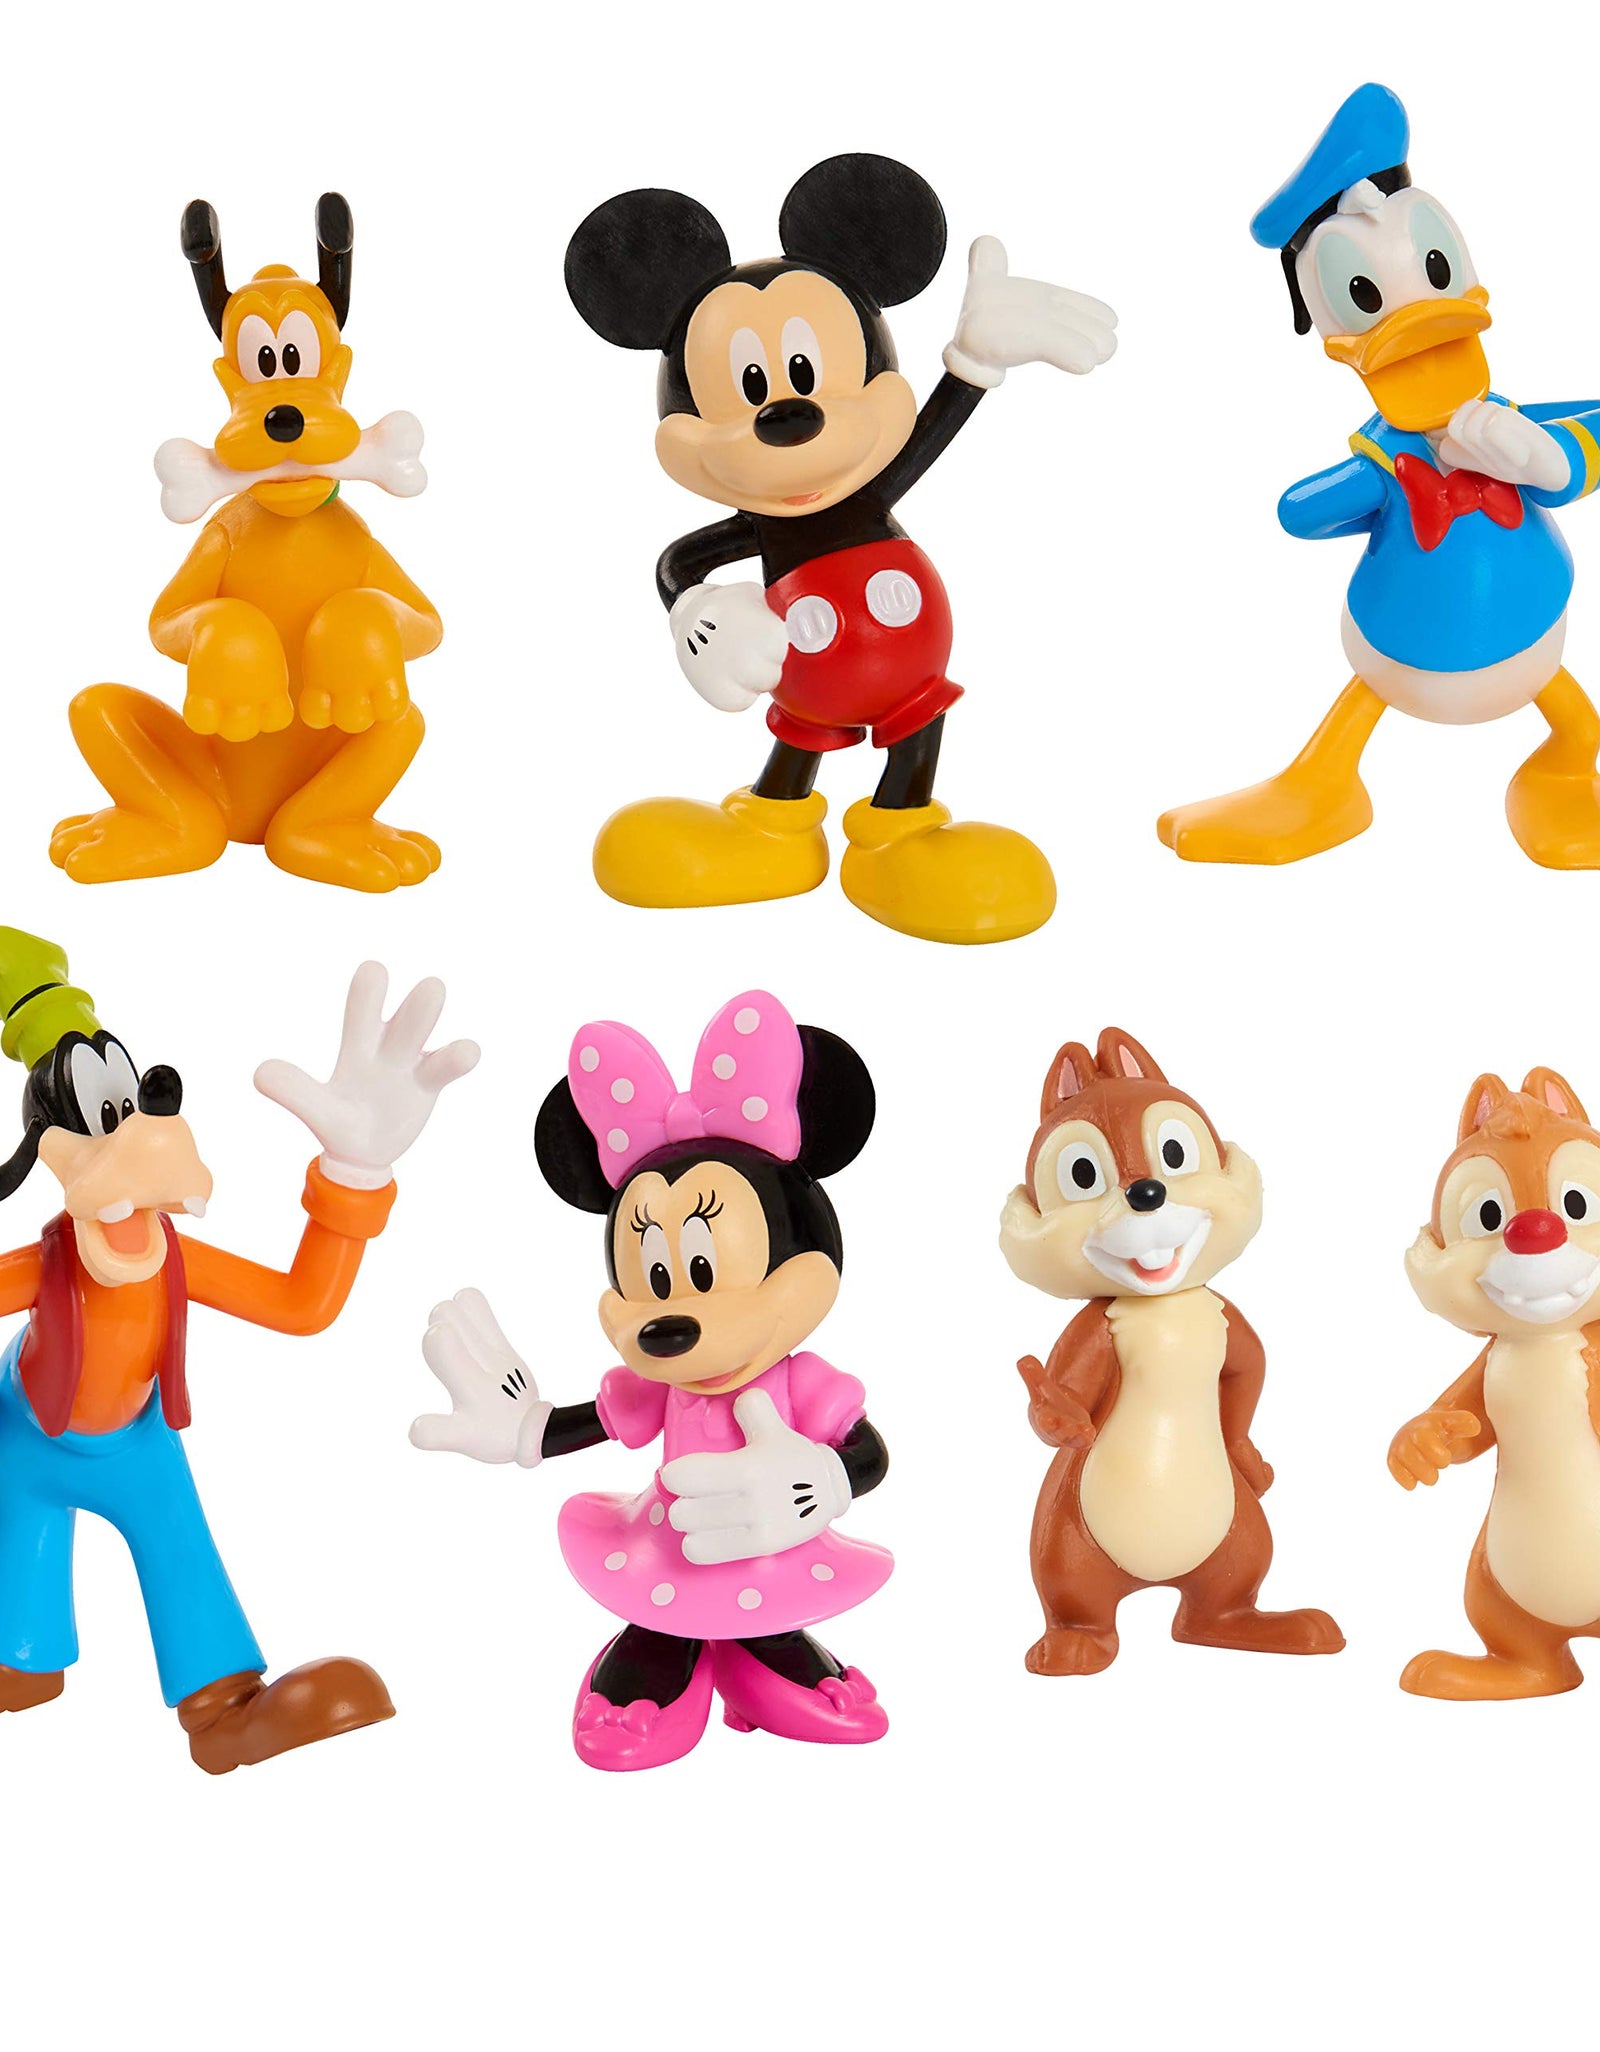 Mickey Mouse 7-Piece Figure Set, Toys for 3 Year Old Boys, Amazon Exclusive, by Just Play